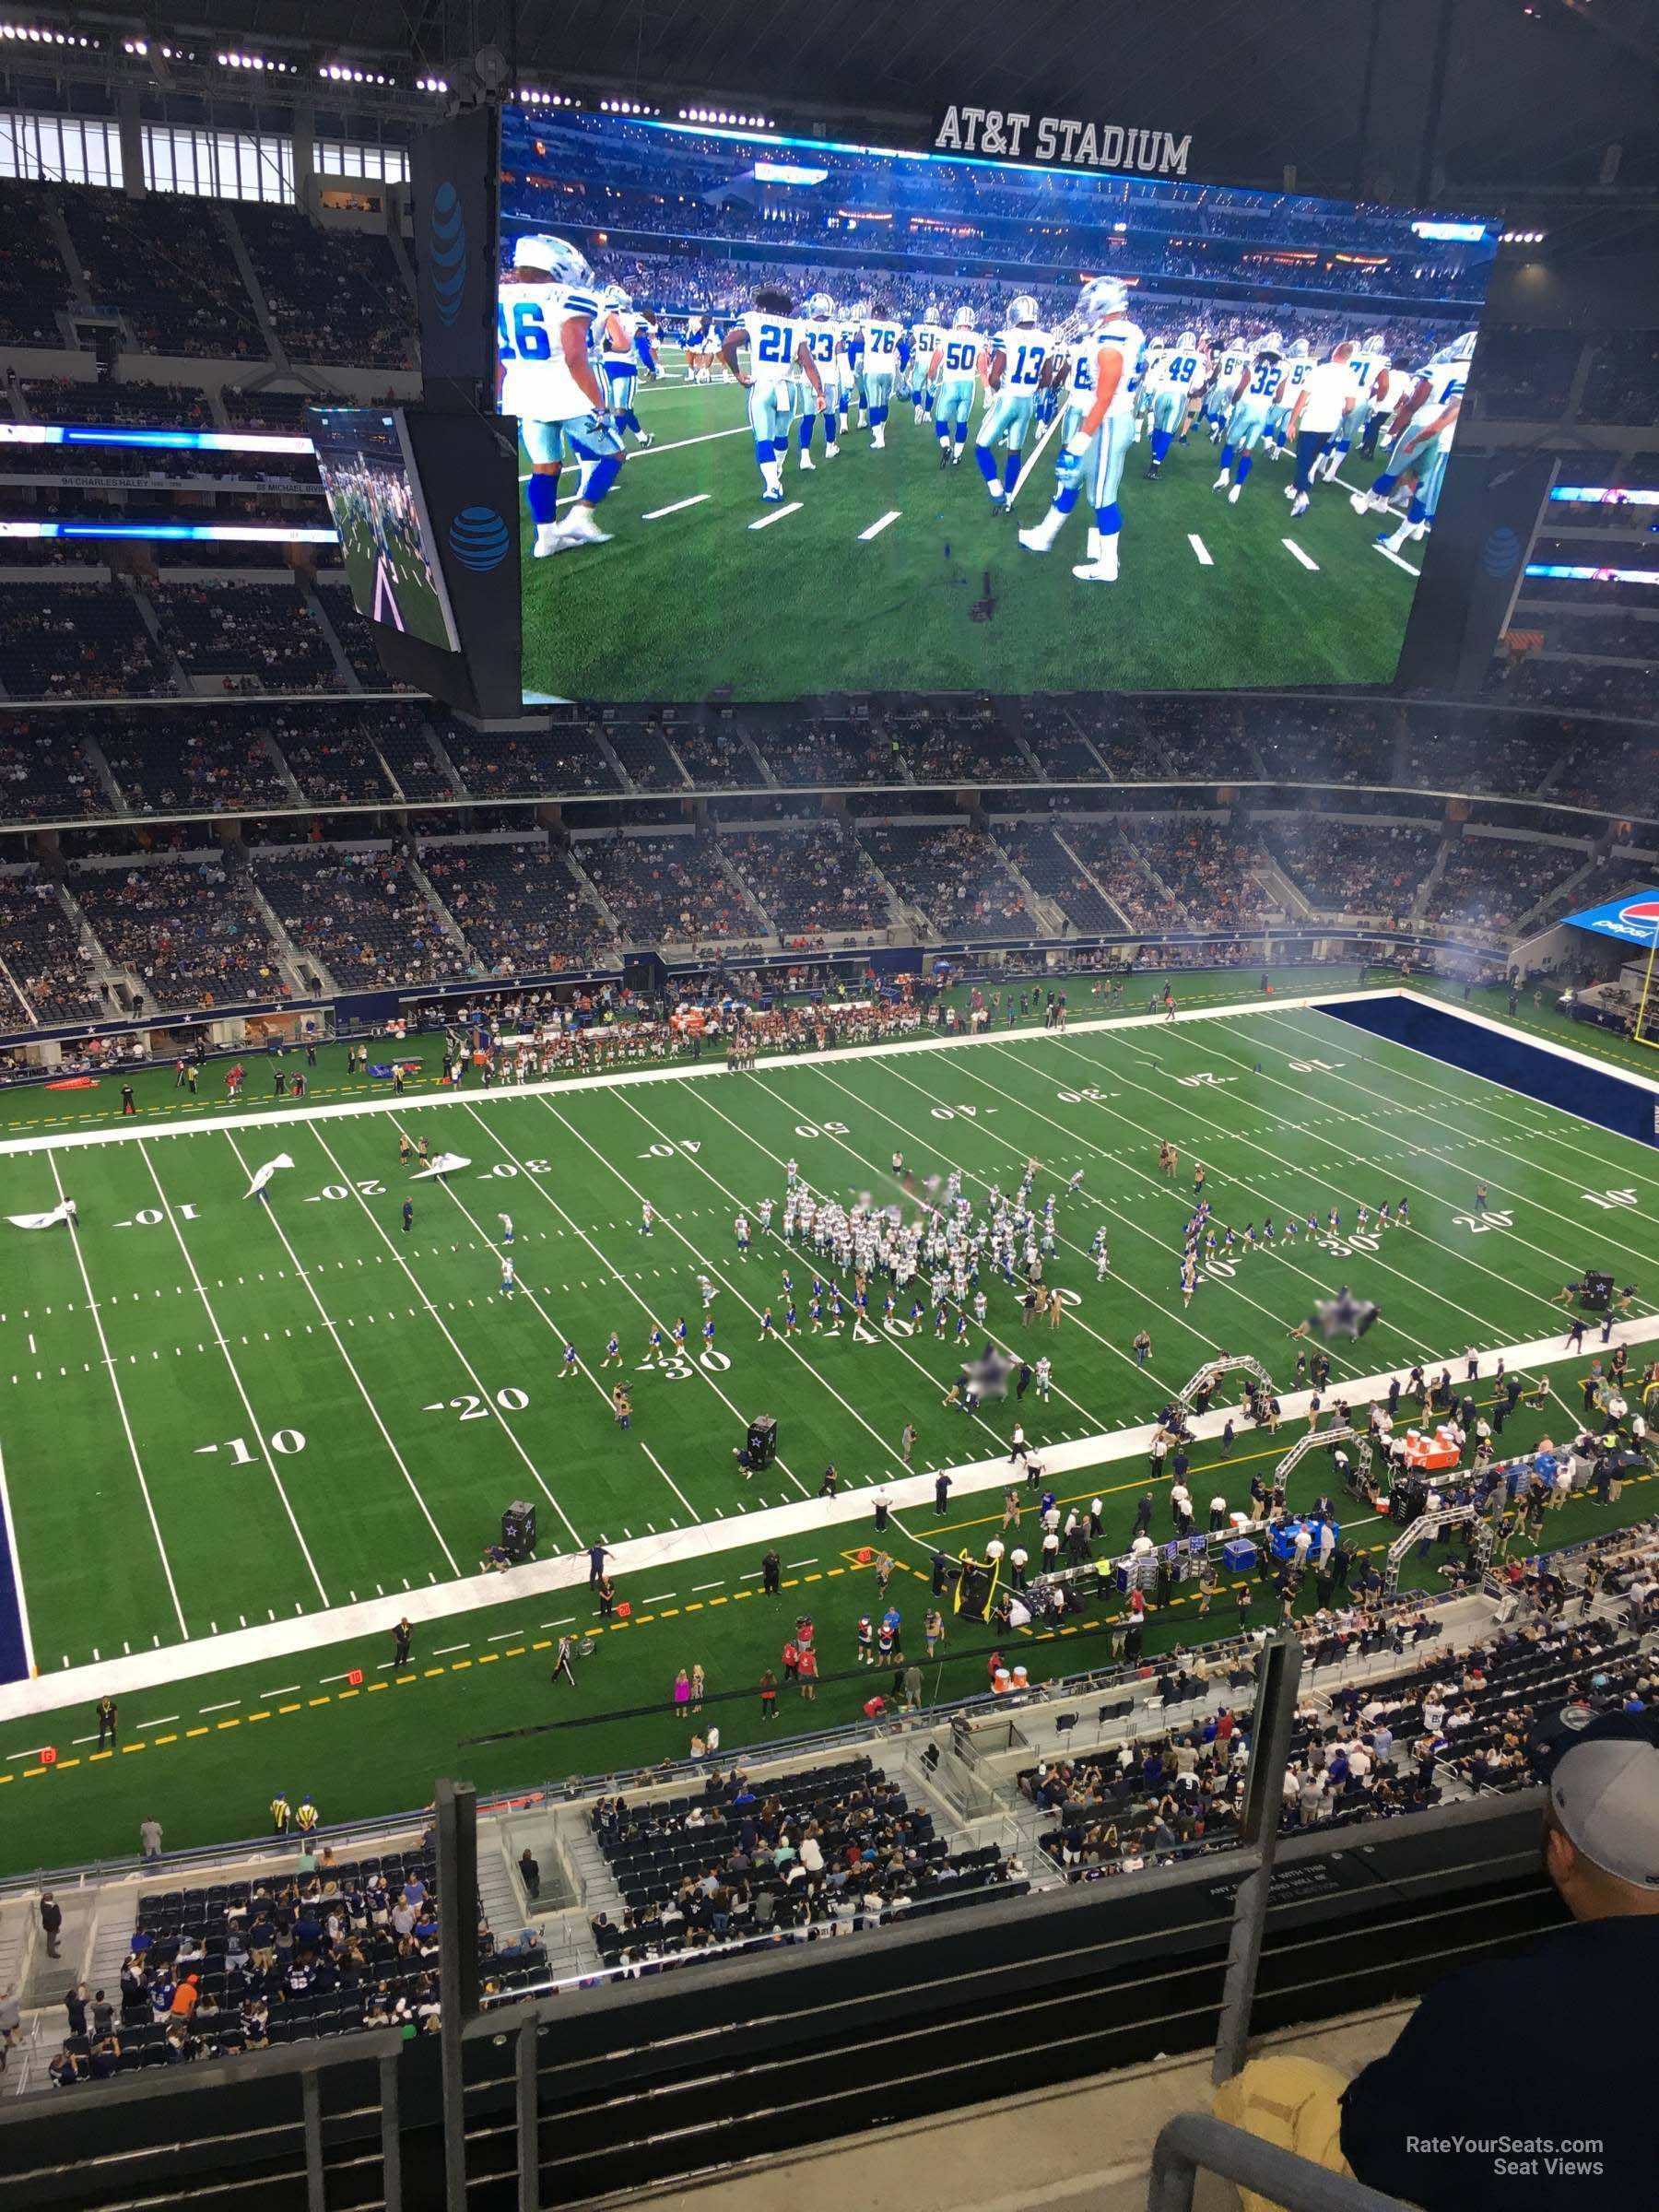 section 418, row 4 seat view  for football - at&t stadium (cowboys stadium)